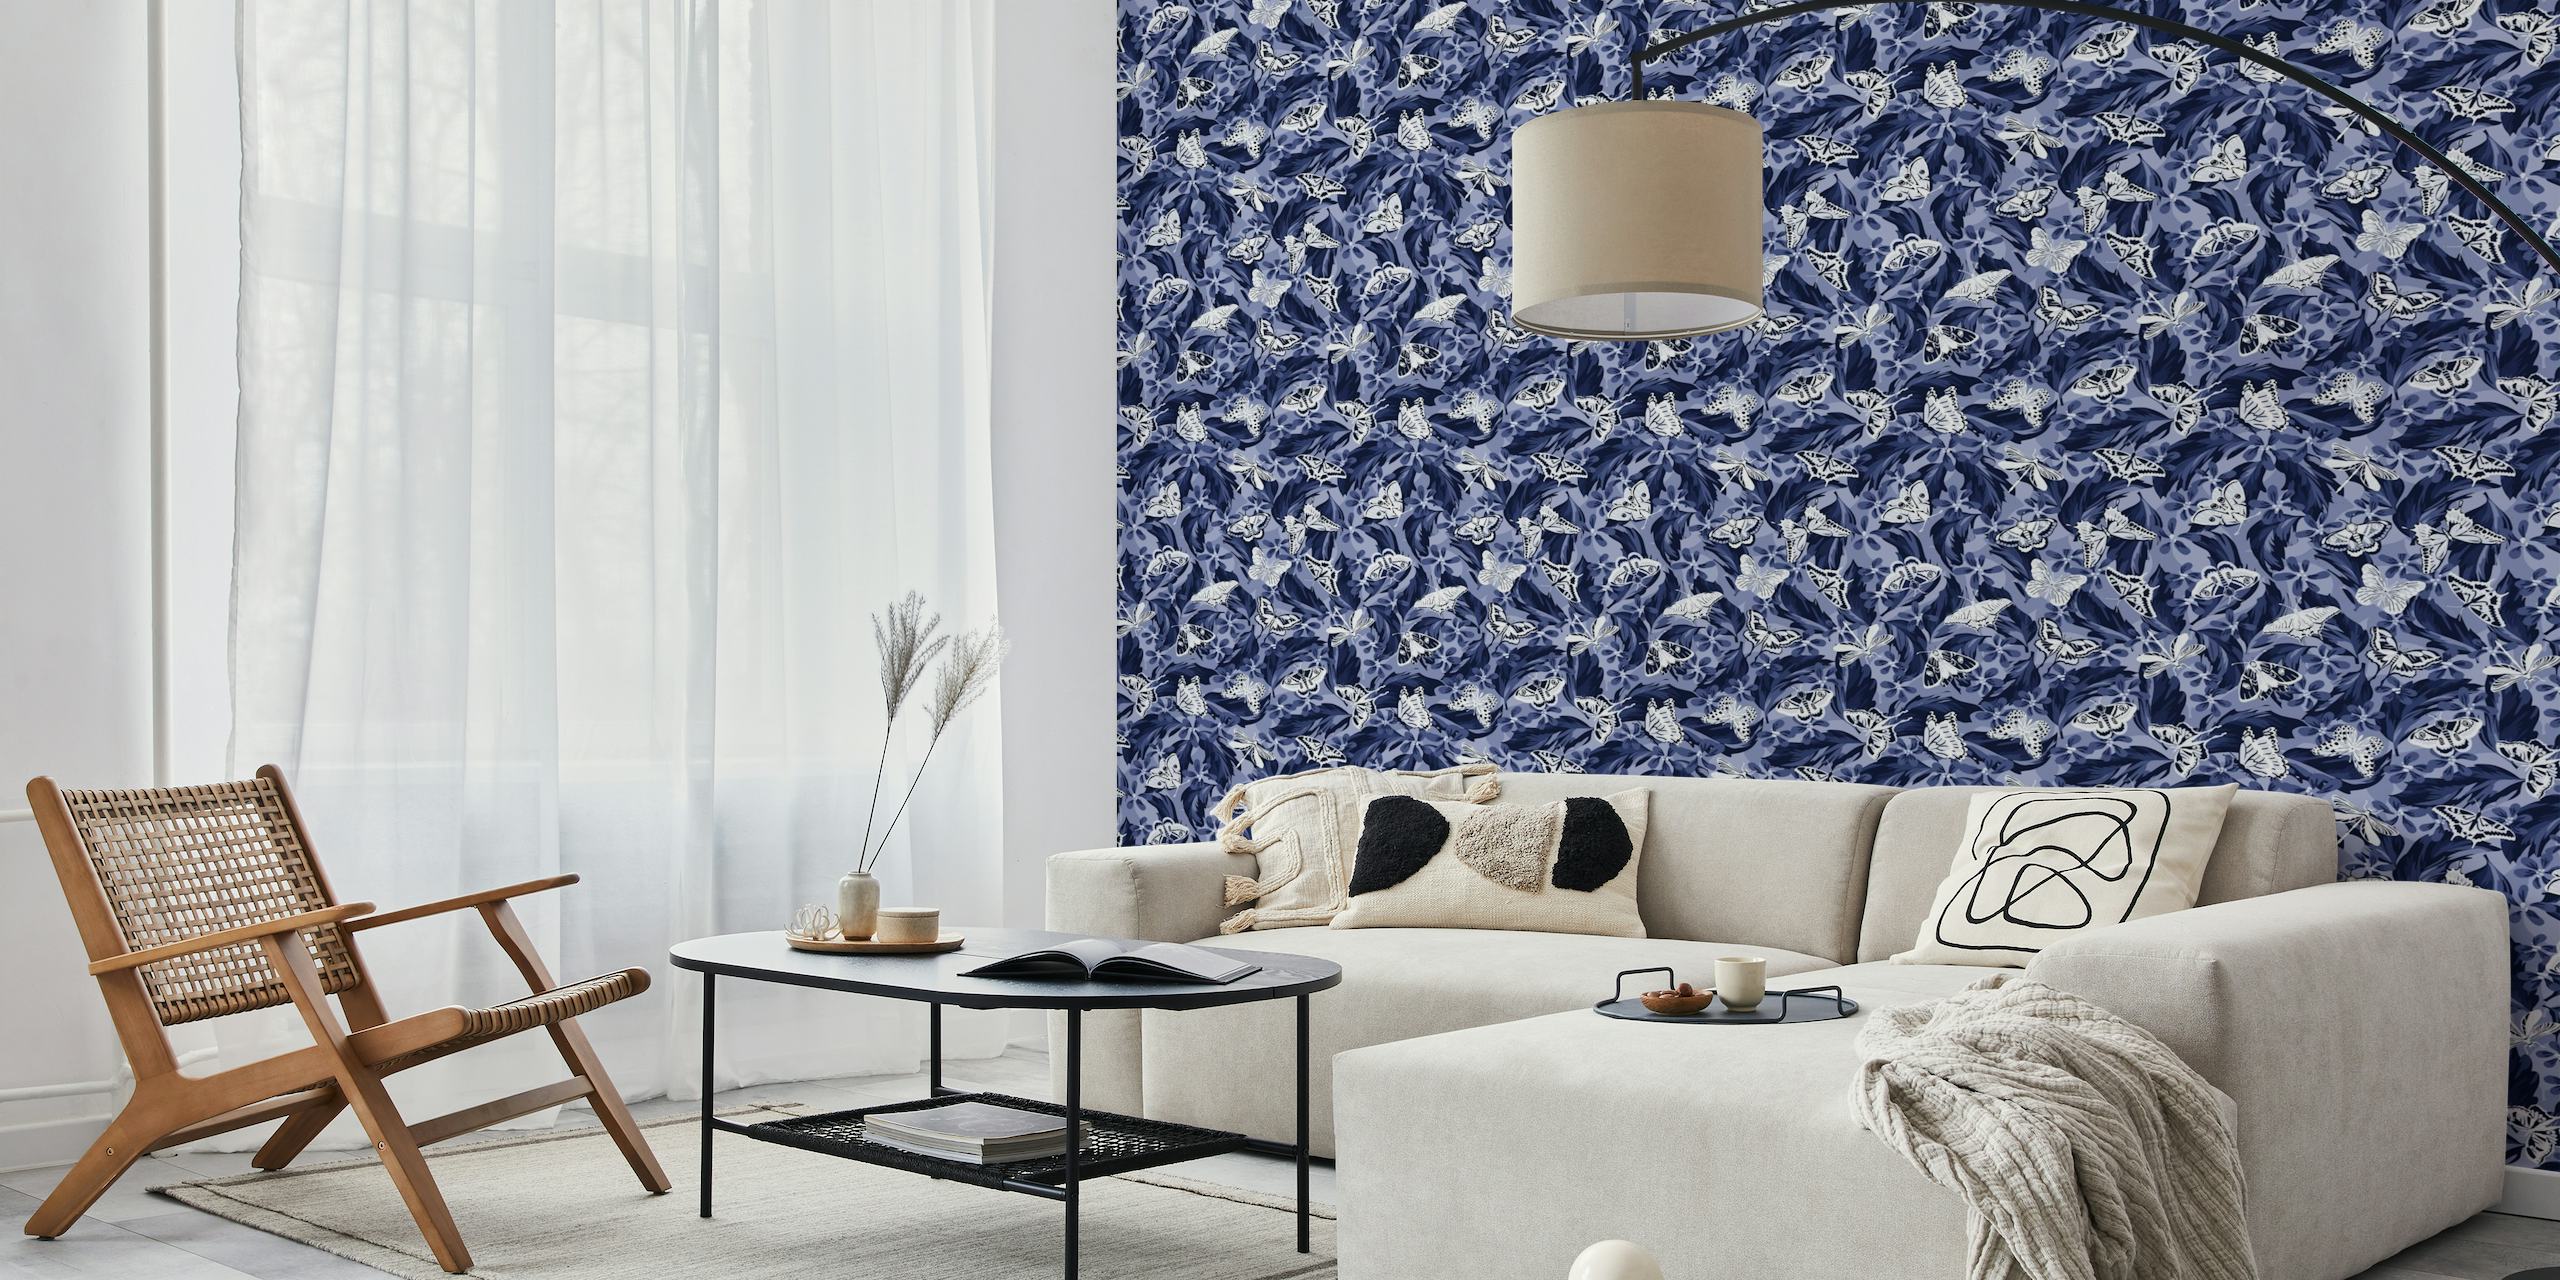 A wall mural featuring blue and white butterflies against a backdrop of dark blue foliage, creating a serene night-time scene.